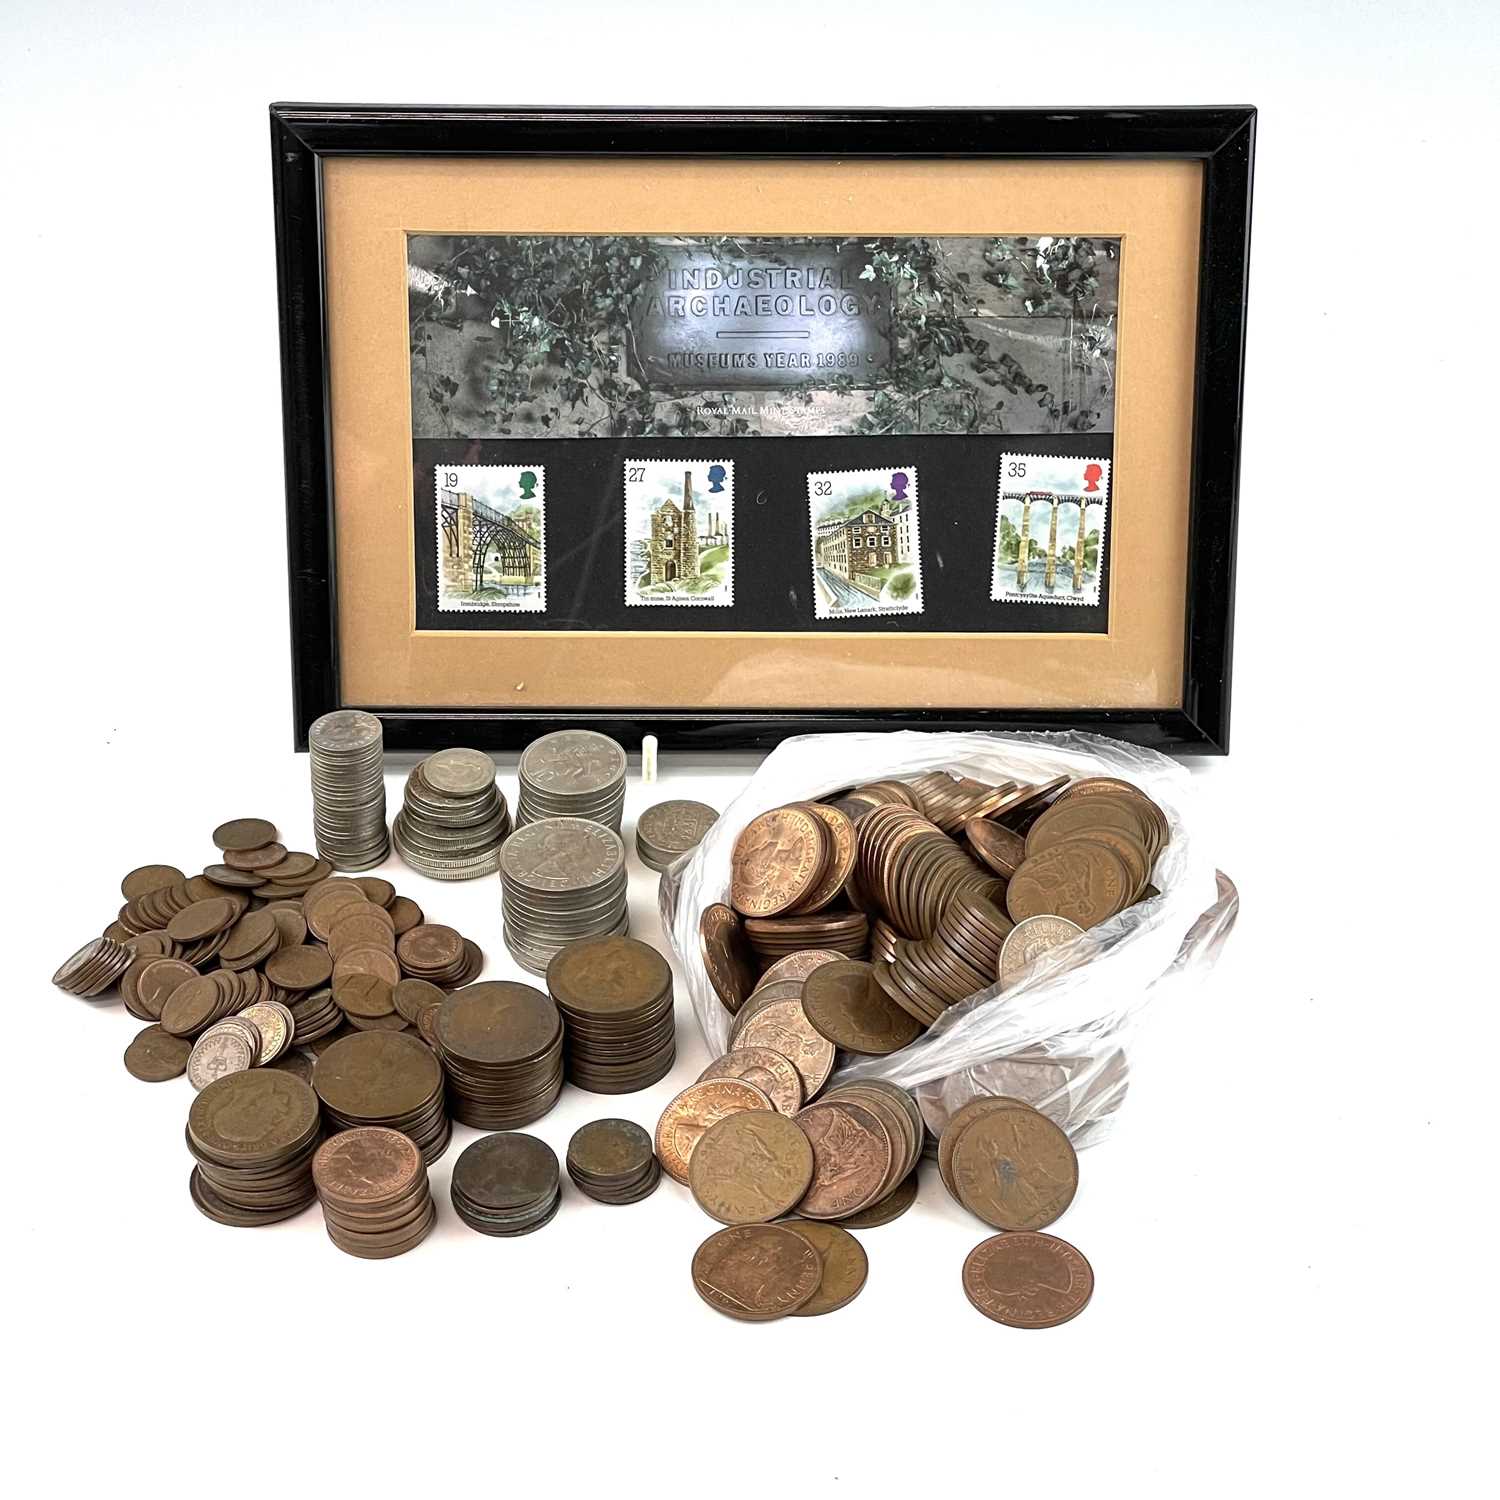 British Coinage. Lot includes approximately £1 of pre 1947 G.B silver coinage plus various other